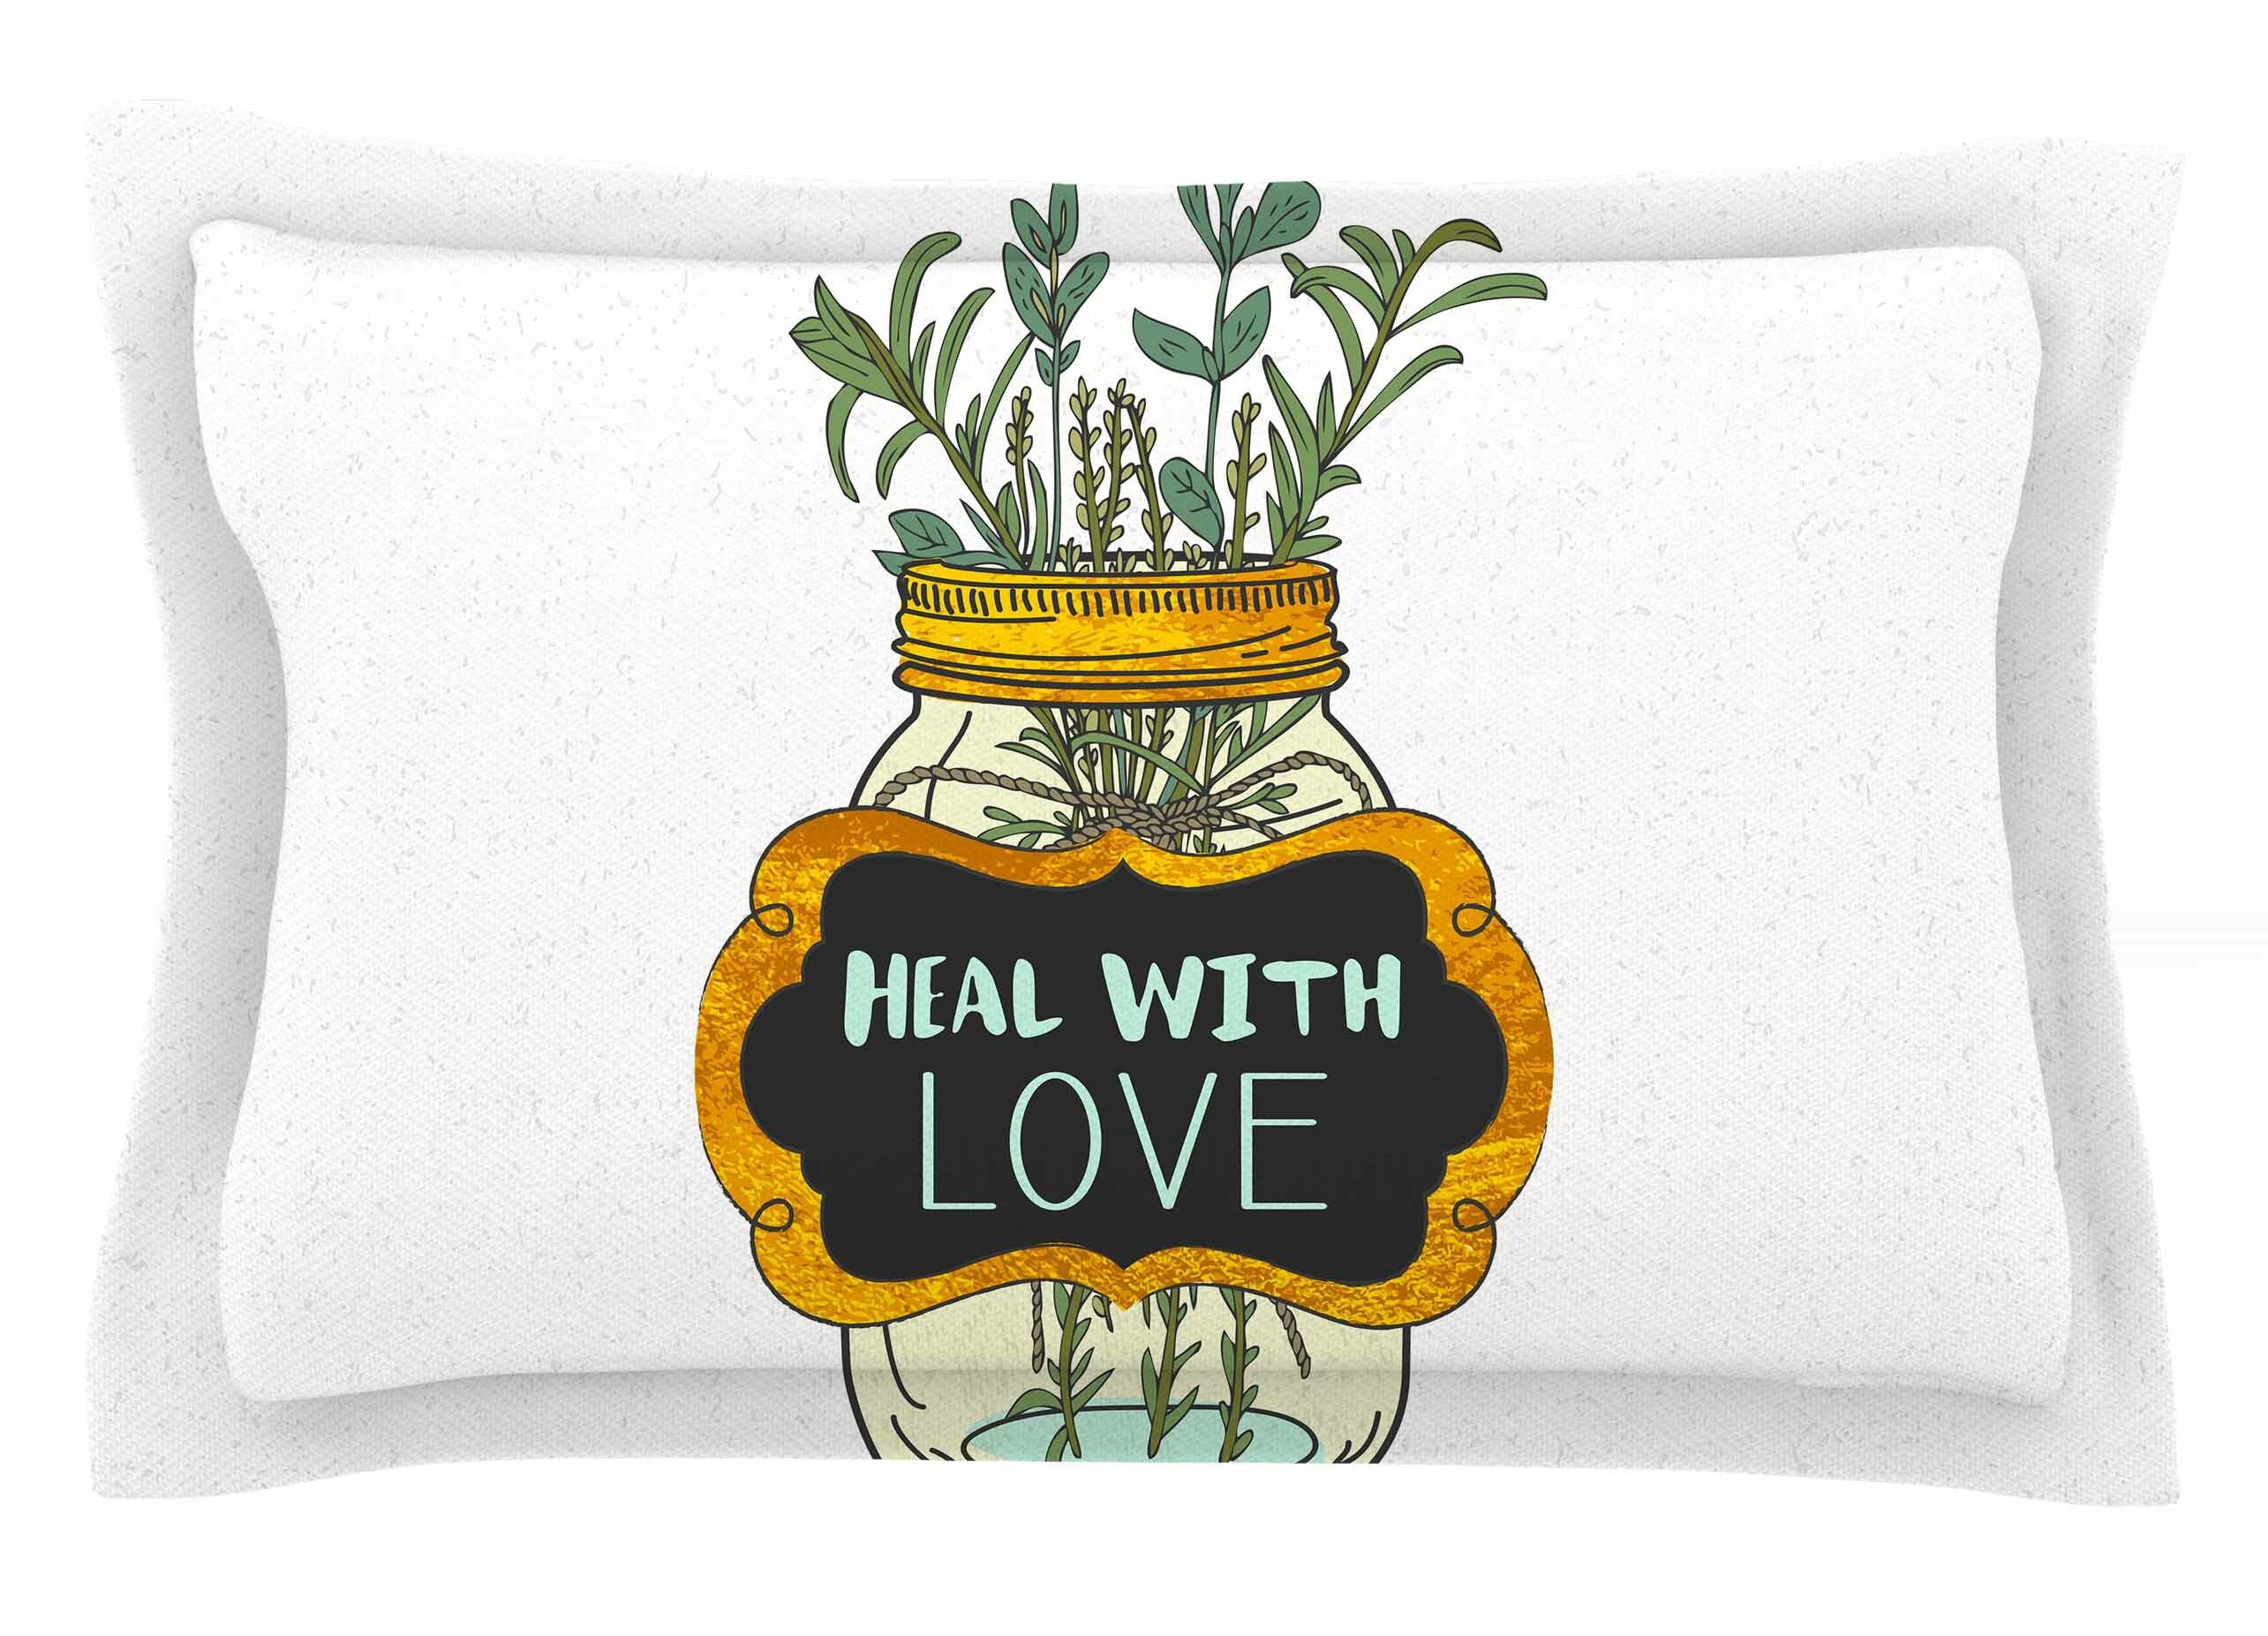 East Urban Home Pom Graphic Design Heal With Love Illustration